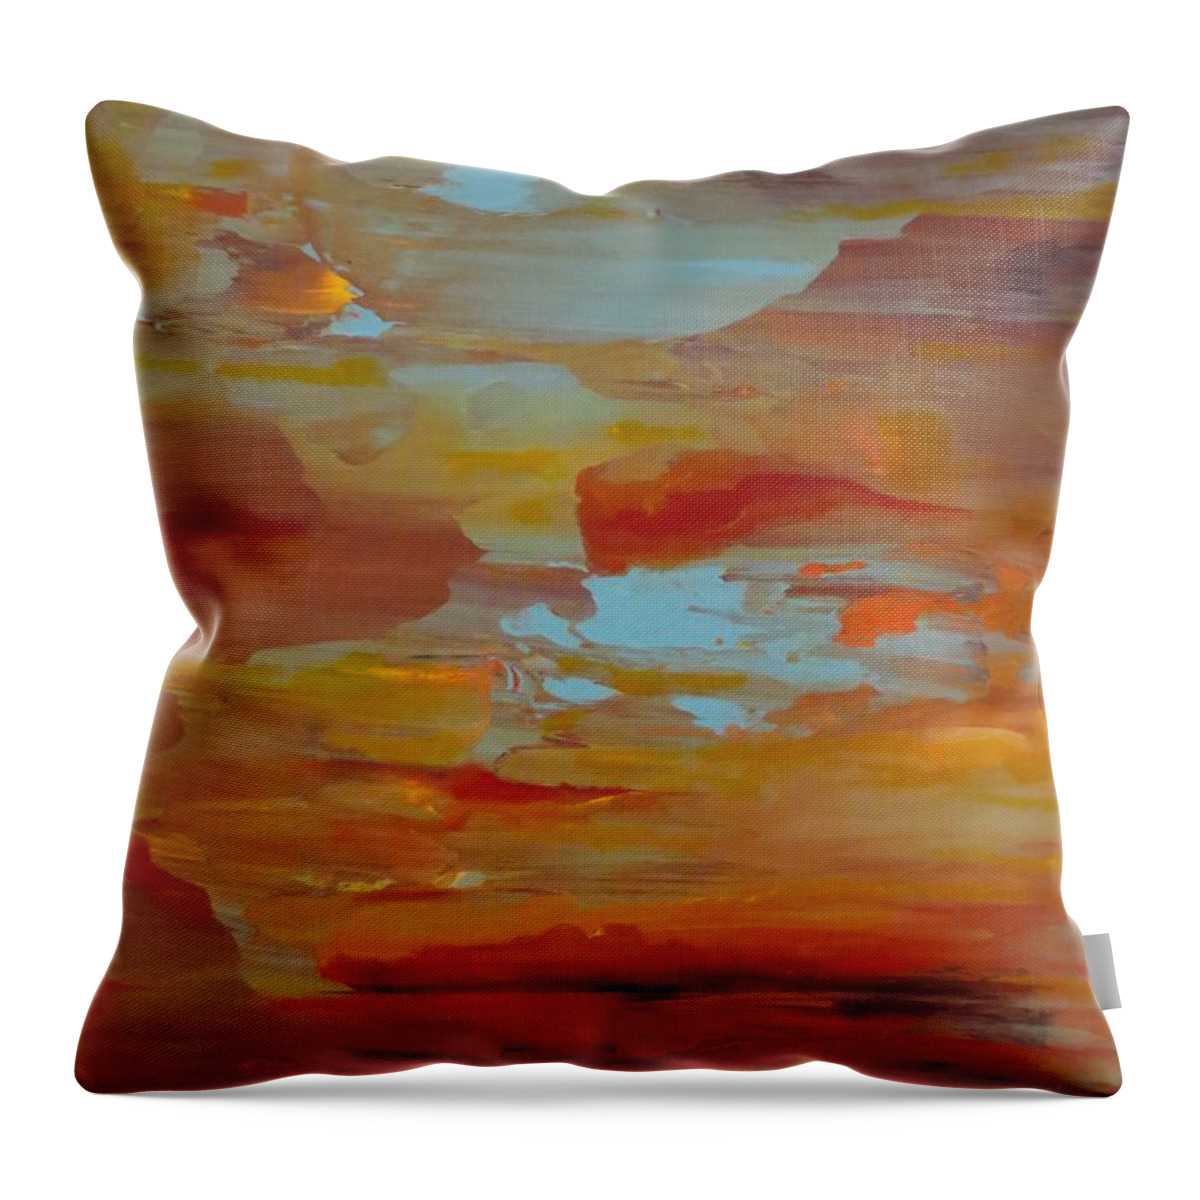 Abstract Throw Pillow featuring the painting Days End by Soraya Silvestri